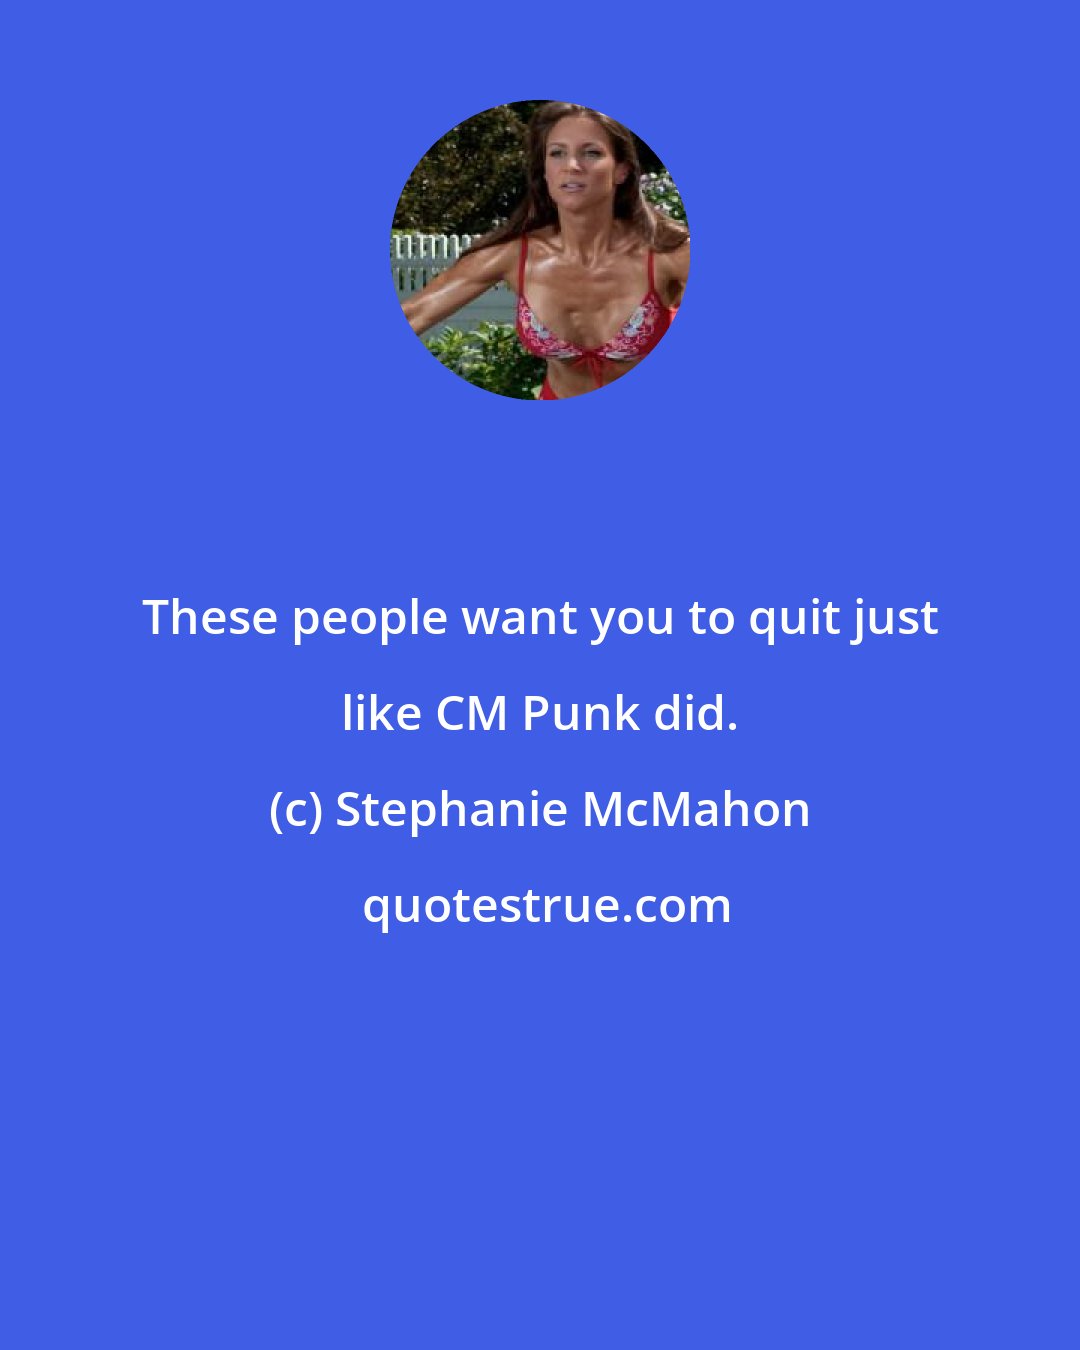 Stephanie McMahon: These people want you to quit just like CM Punk did.